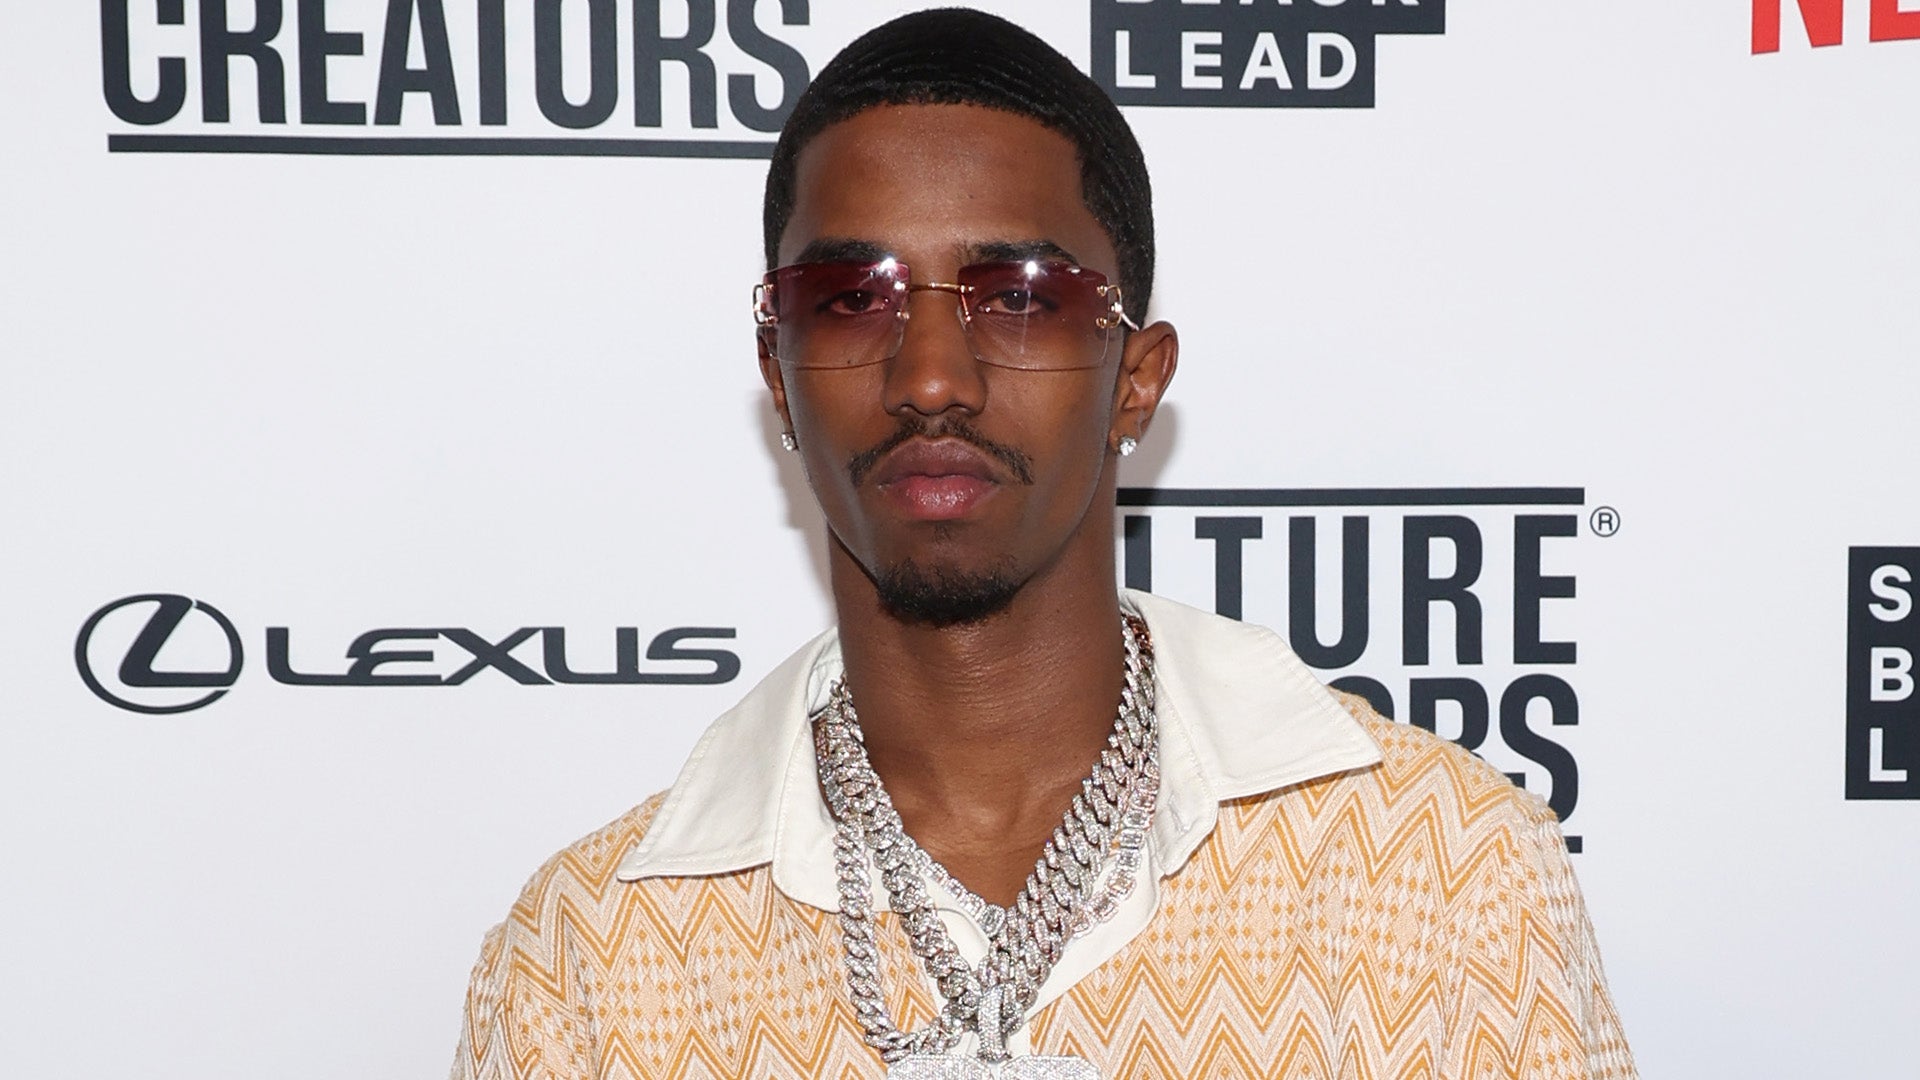 Diddy’s Son Christian Combs Sued for Sexual Assault Following Home Raid